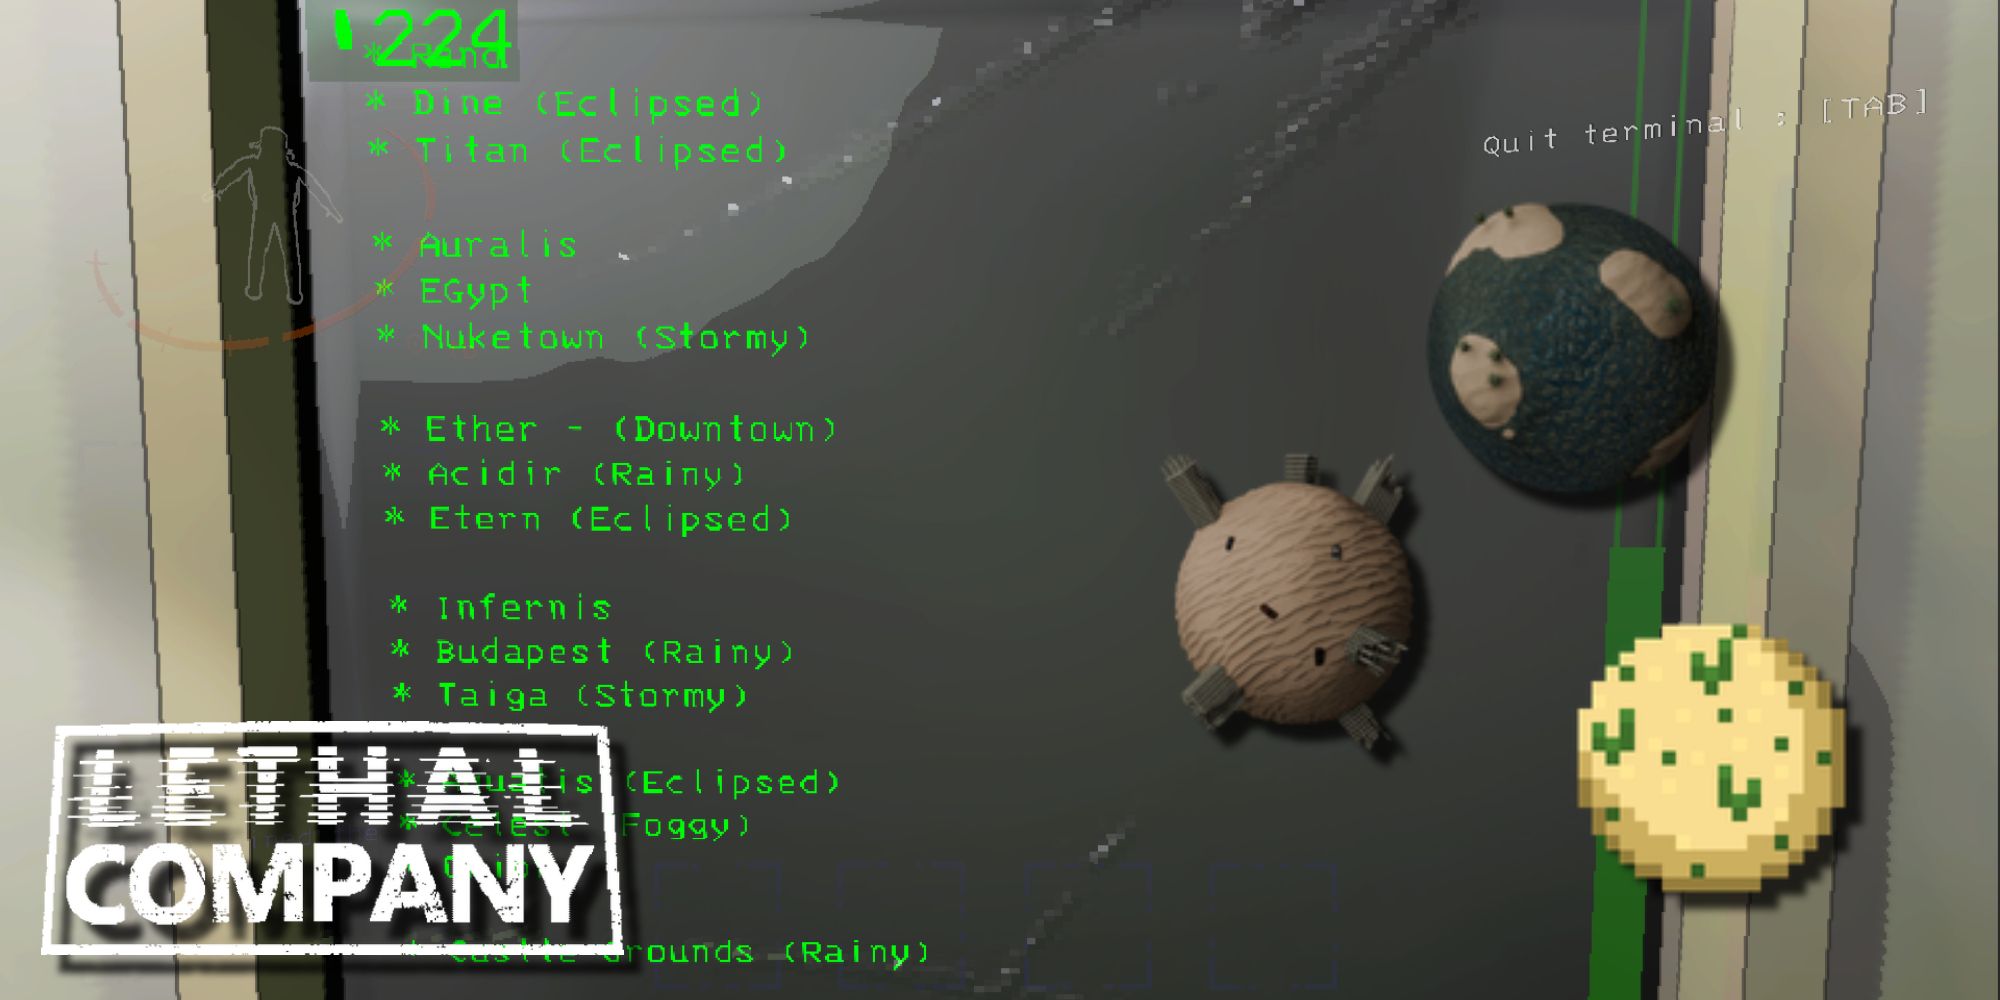 The access terminal shows many different modded moons and three moon images from creators